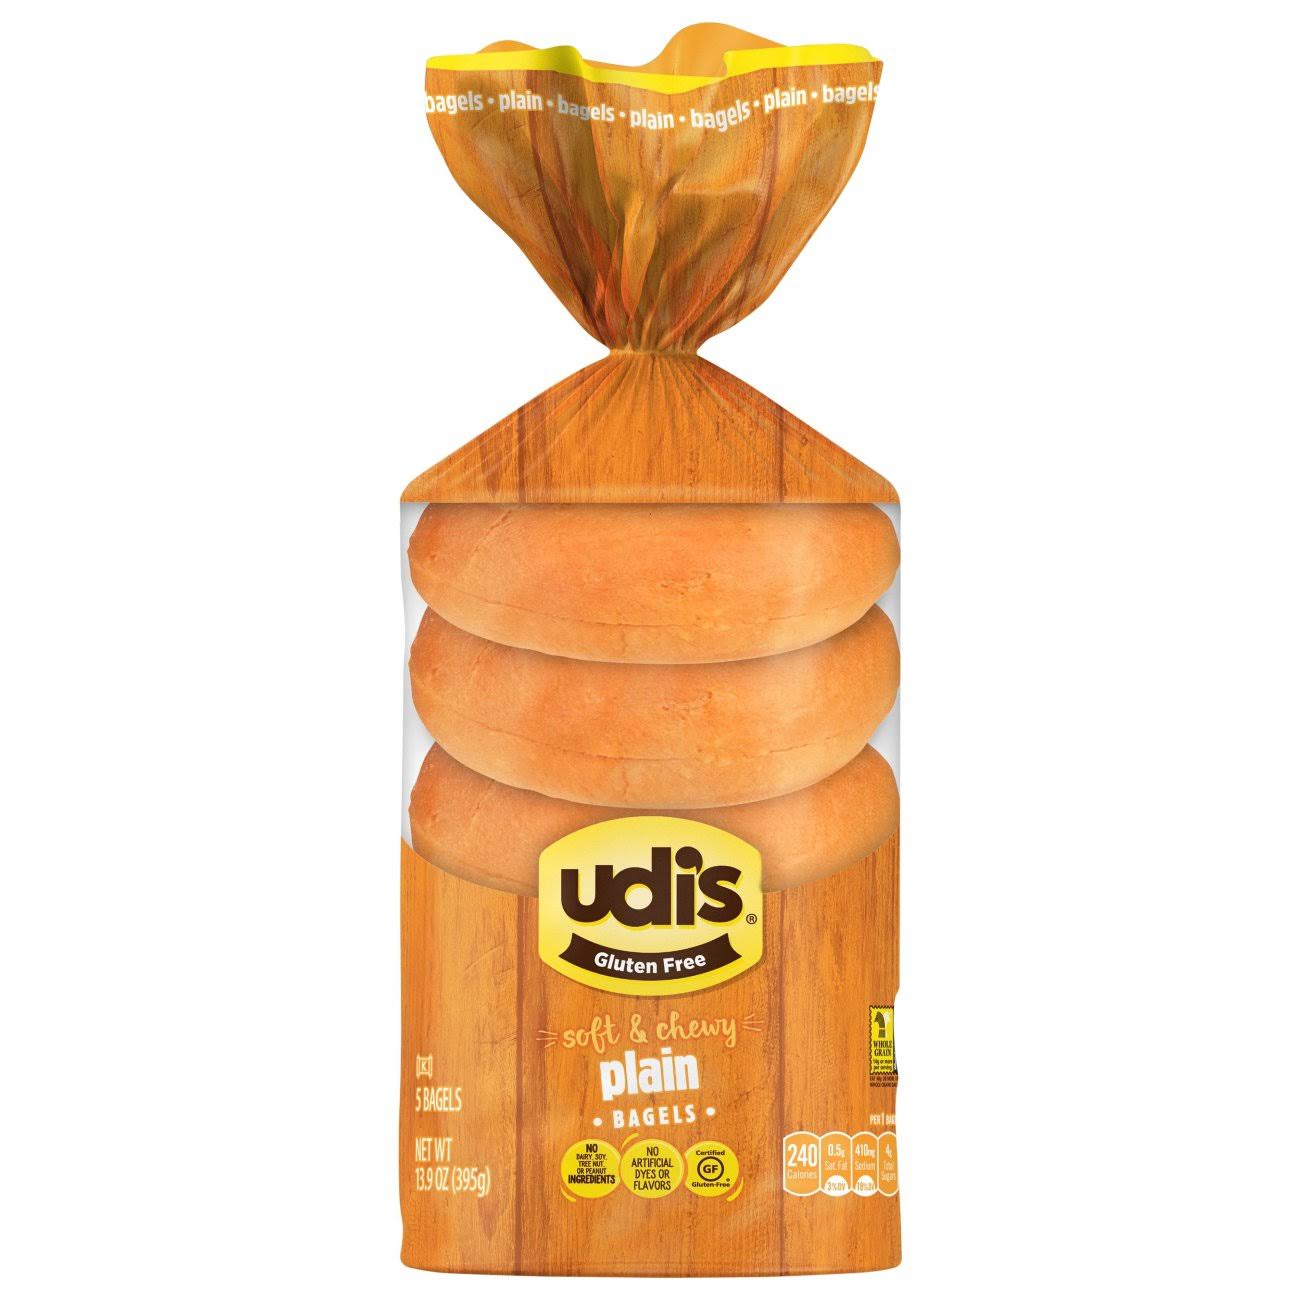 Udi's Gluten Free Soft & Chewy Plain Bagels - 5 Pack